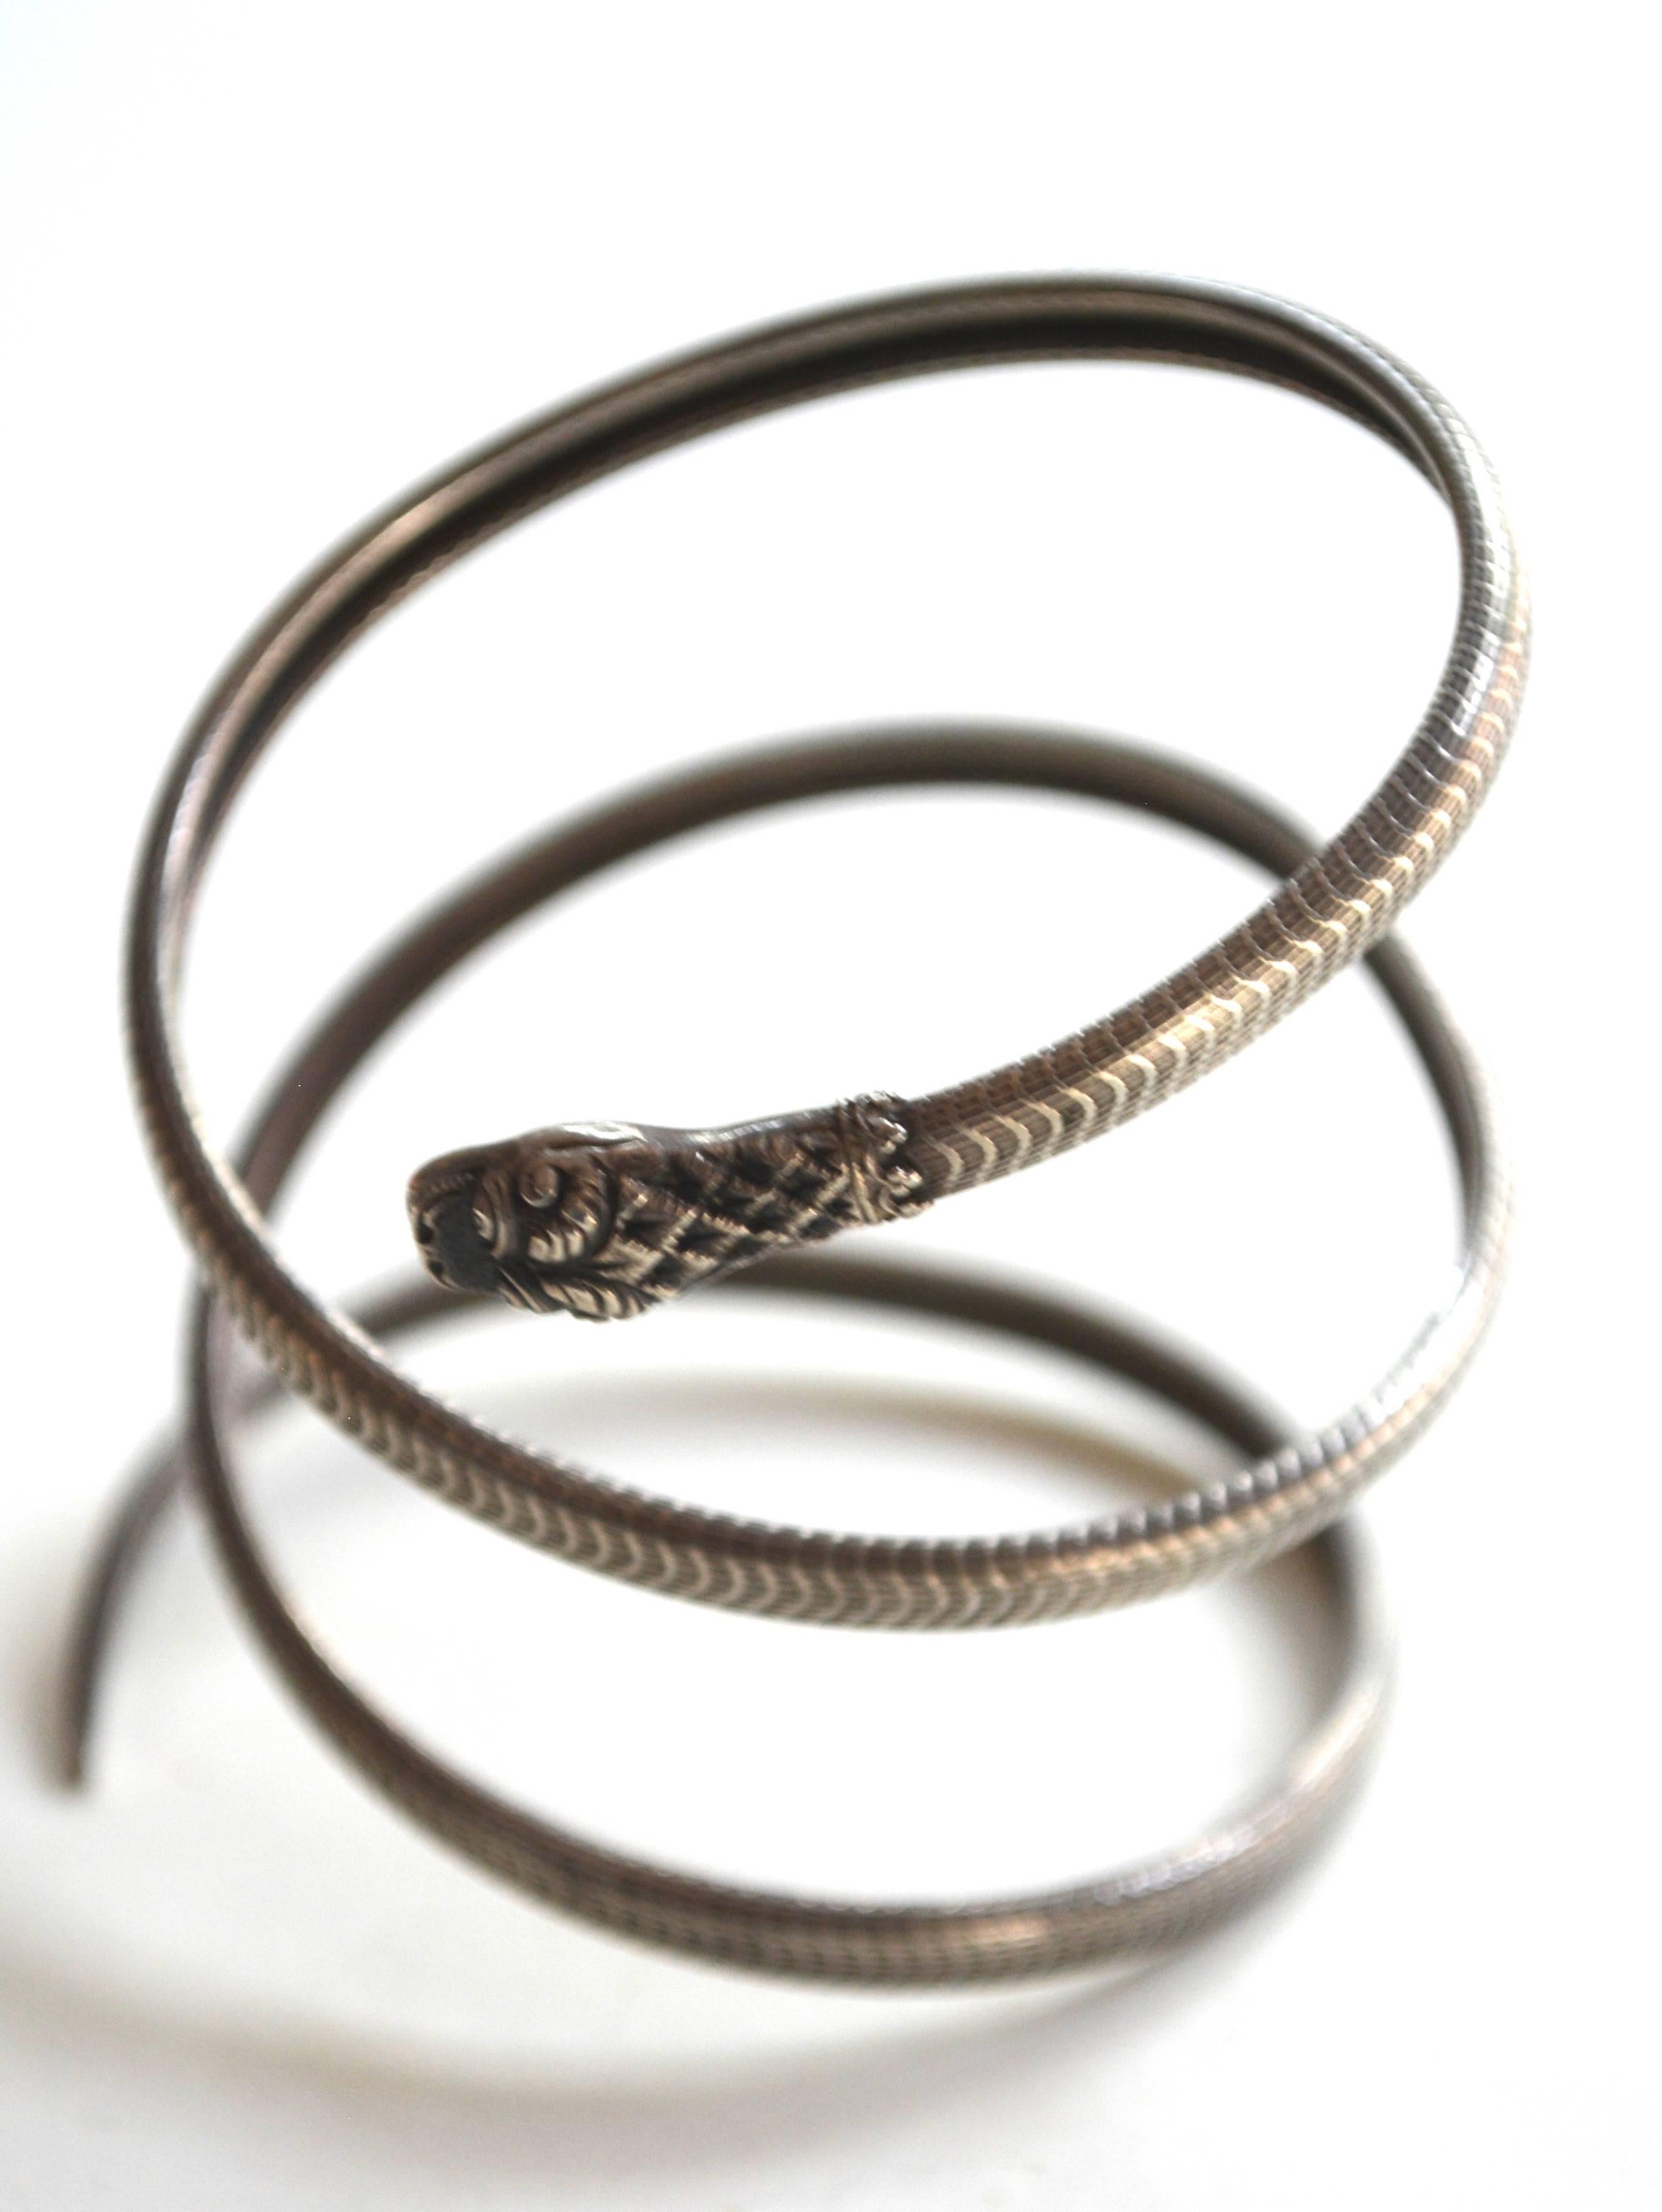 Edwardian silver textured metal, almost gothic snake bracelet. It wraps on and has a thinner more petite construction that works as a whole which has impact. The head appear to possibly be a silver, maybe 800 and the body could be brass with a